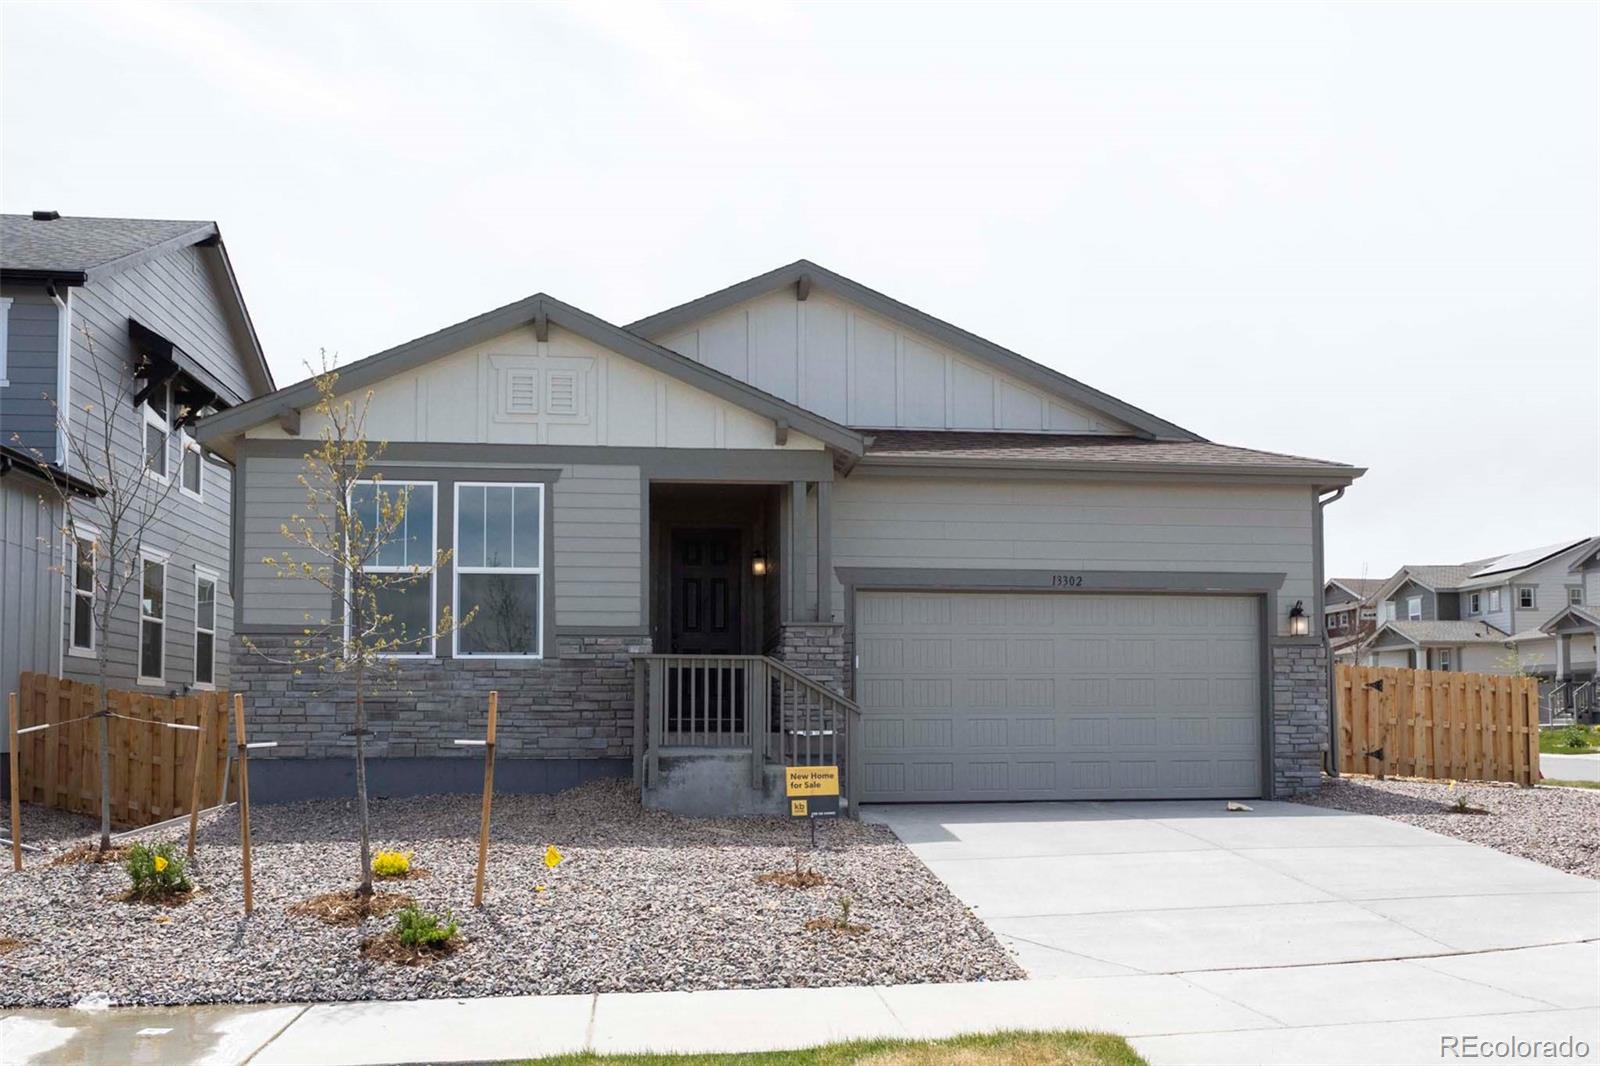 13302 E 110th Way, commerce city MLS: 5490513 Beds: 3 Baths: 2 Price: $608,000